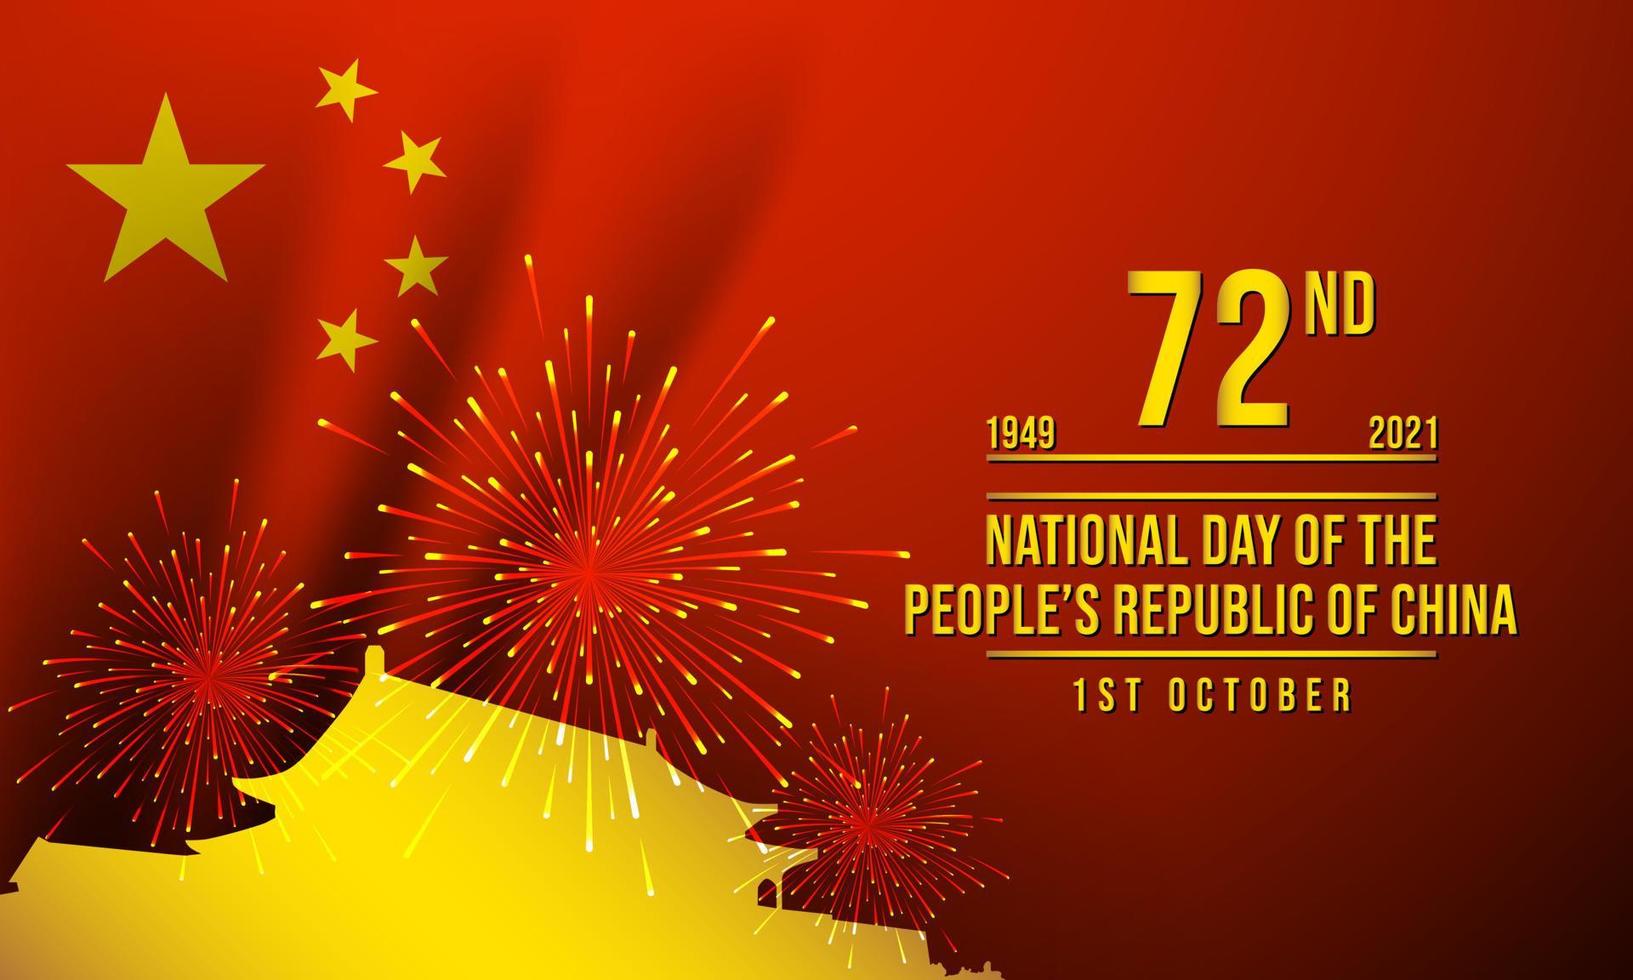 National Day of the People's Republic of China for the 72nd. Poster, greeting card or banner for China. vector